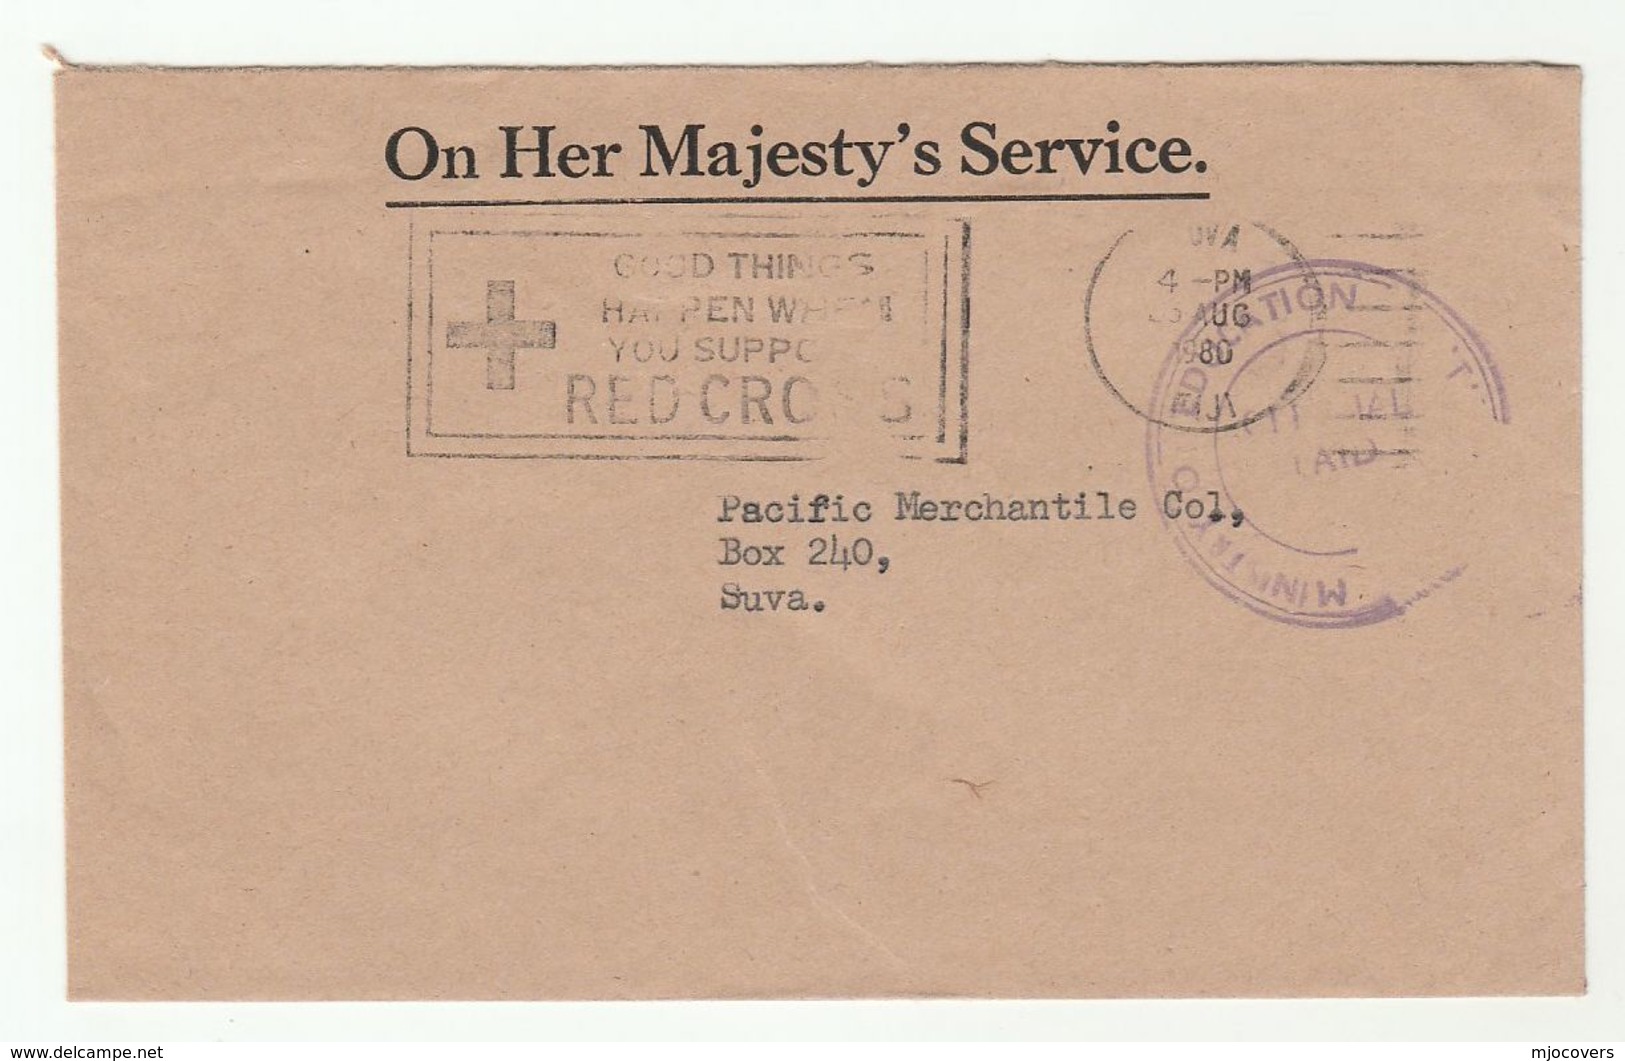 1980 FIJI MINISTRY OF EDUCATION Official Paid OHMS COVER SLOGAN Pmk  RED CROSS - Fiji (1970-...)